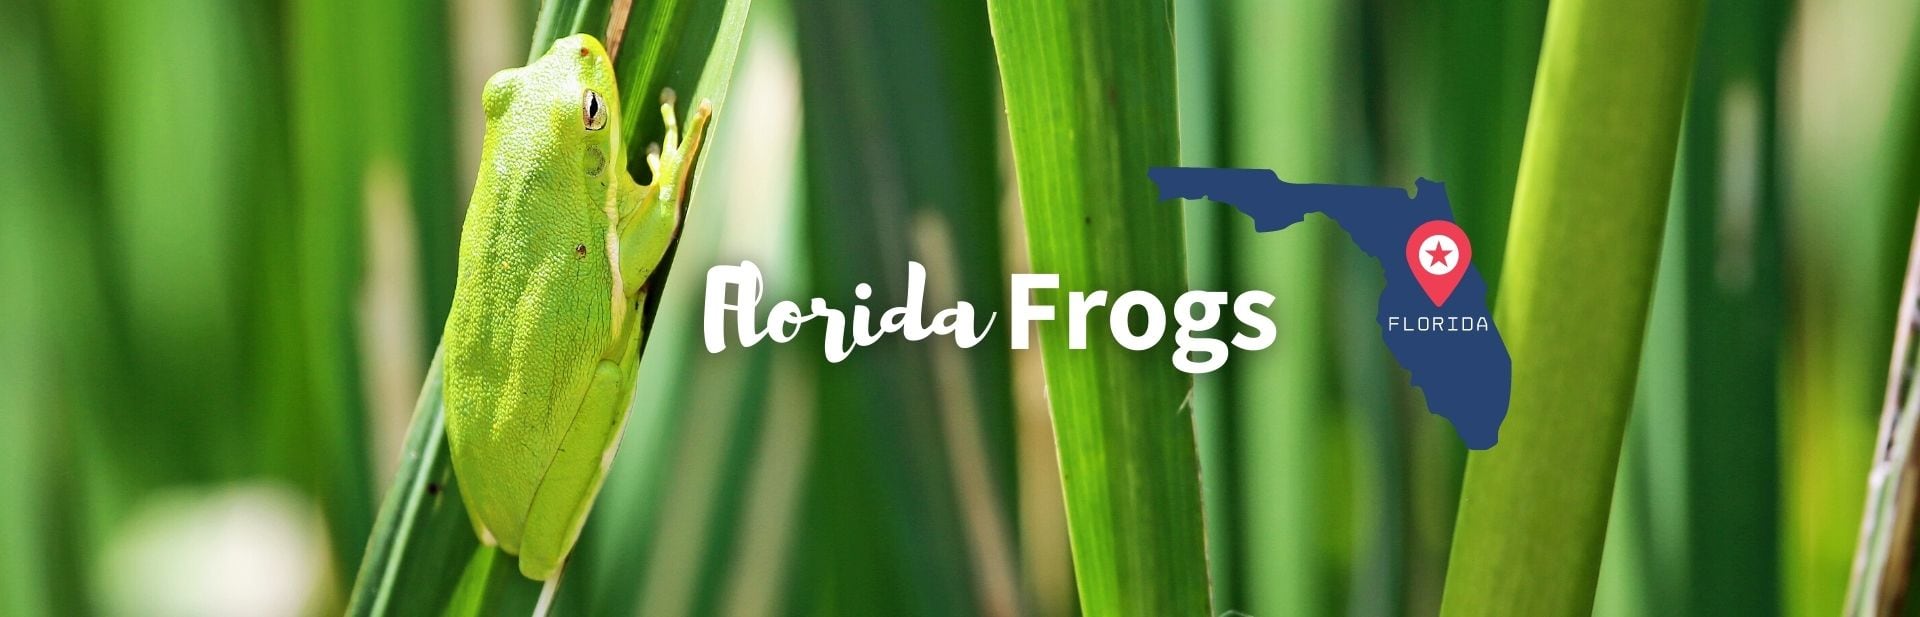 20 Amazing Florida Frogs and Toads: Pictures + Facts